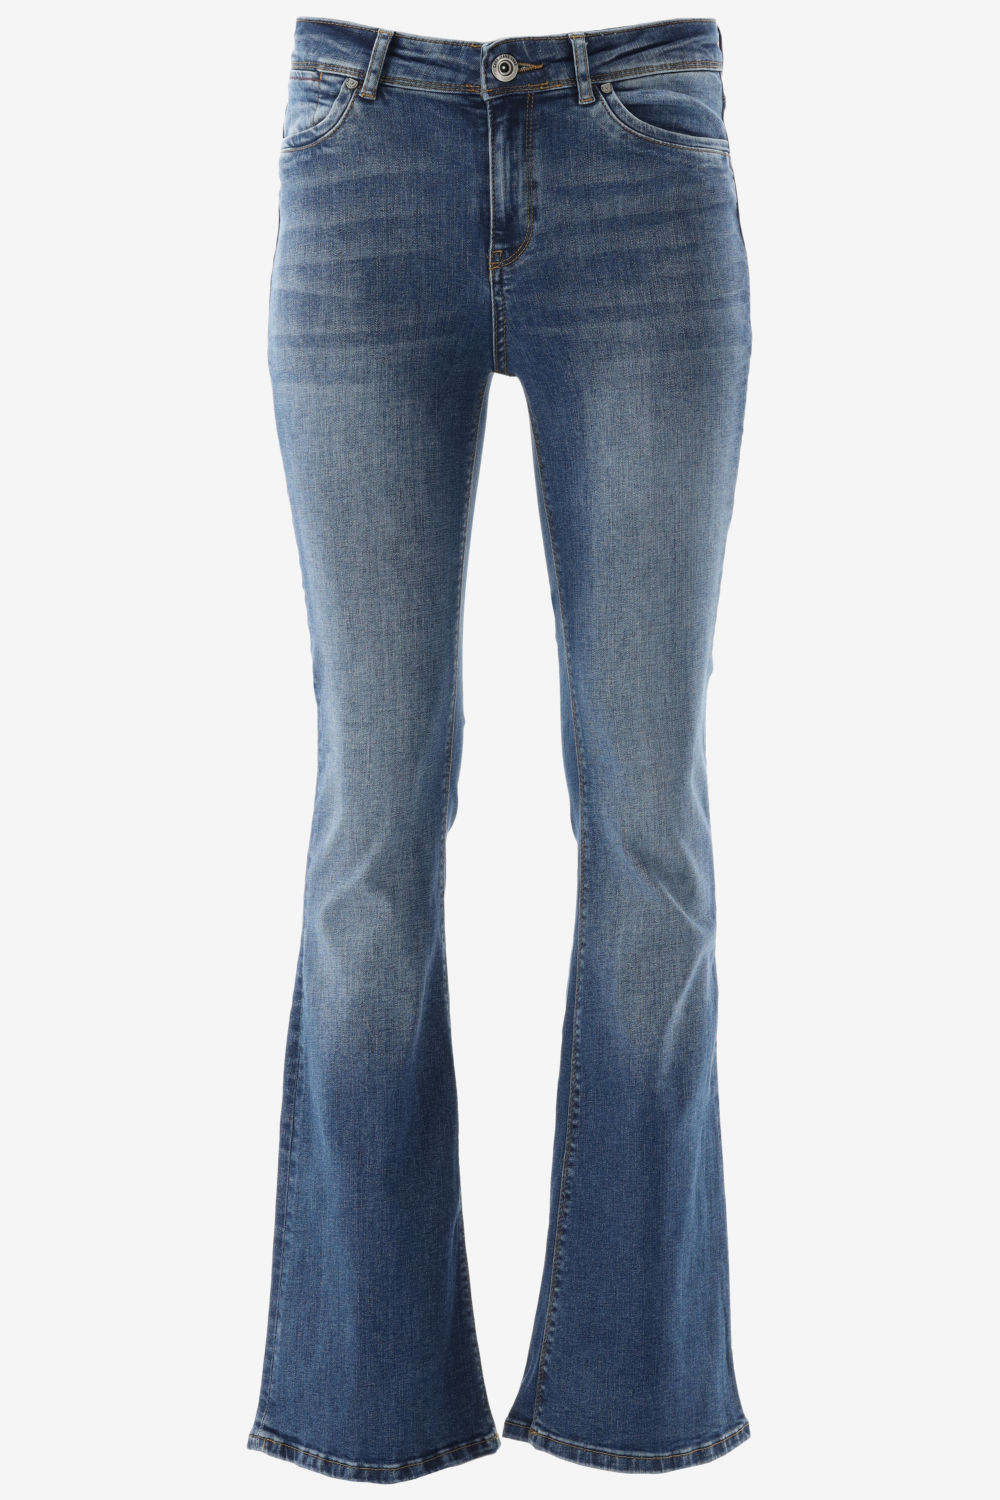 Cars Jeans Michelle Flare Den 78627 Stone Used Dames Maat - W31 X L30